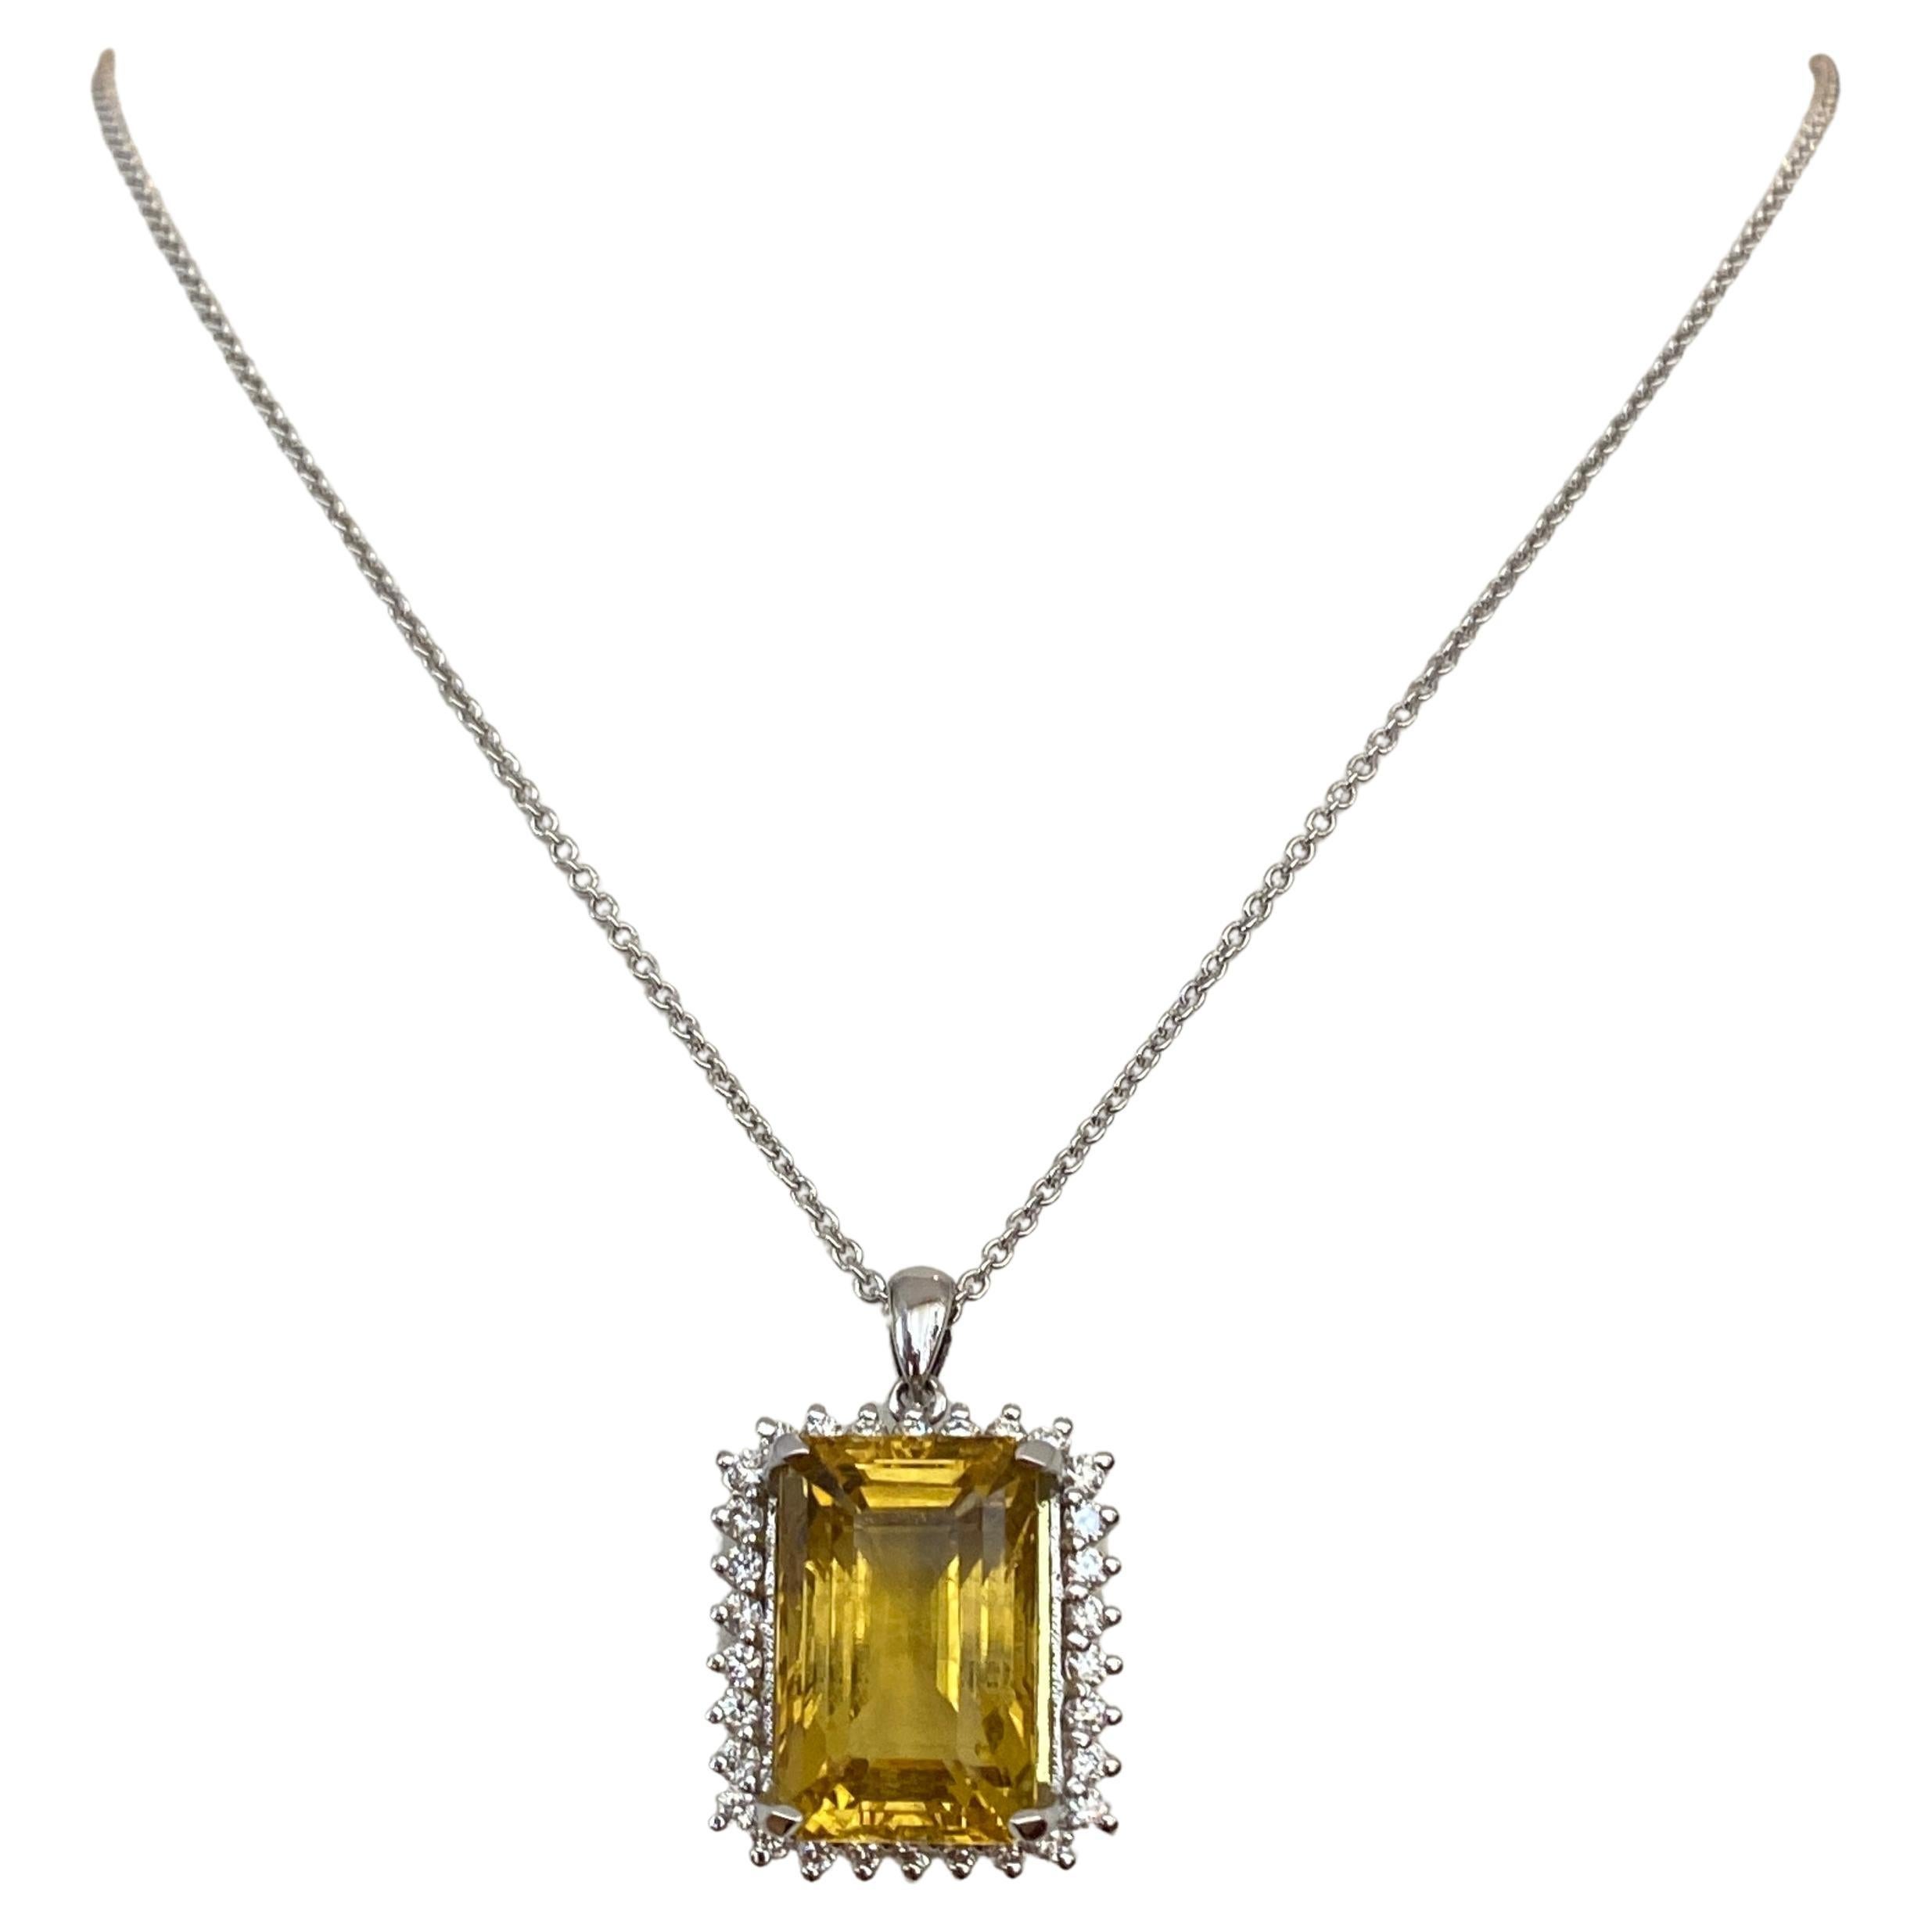 18 Karat White Gold Necklace with a Diamond Pendant Decorated with Citrine